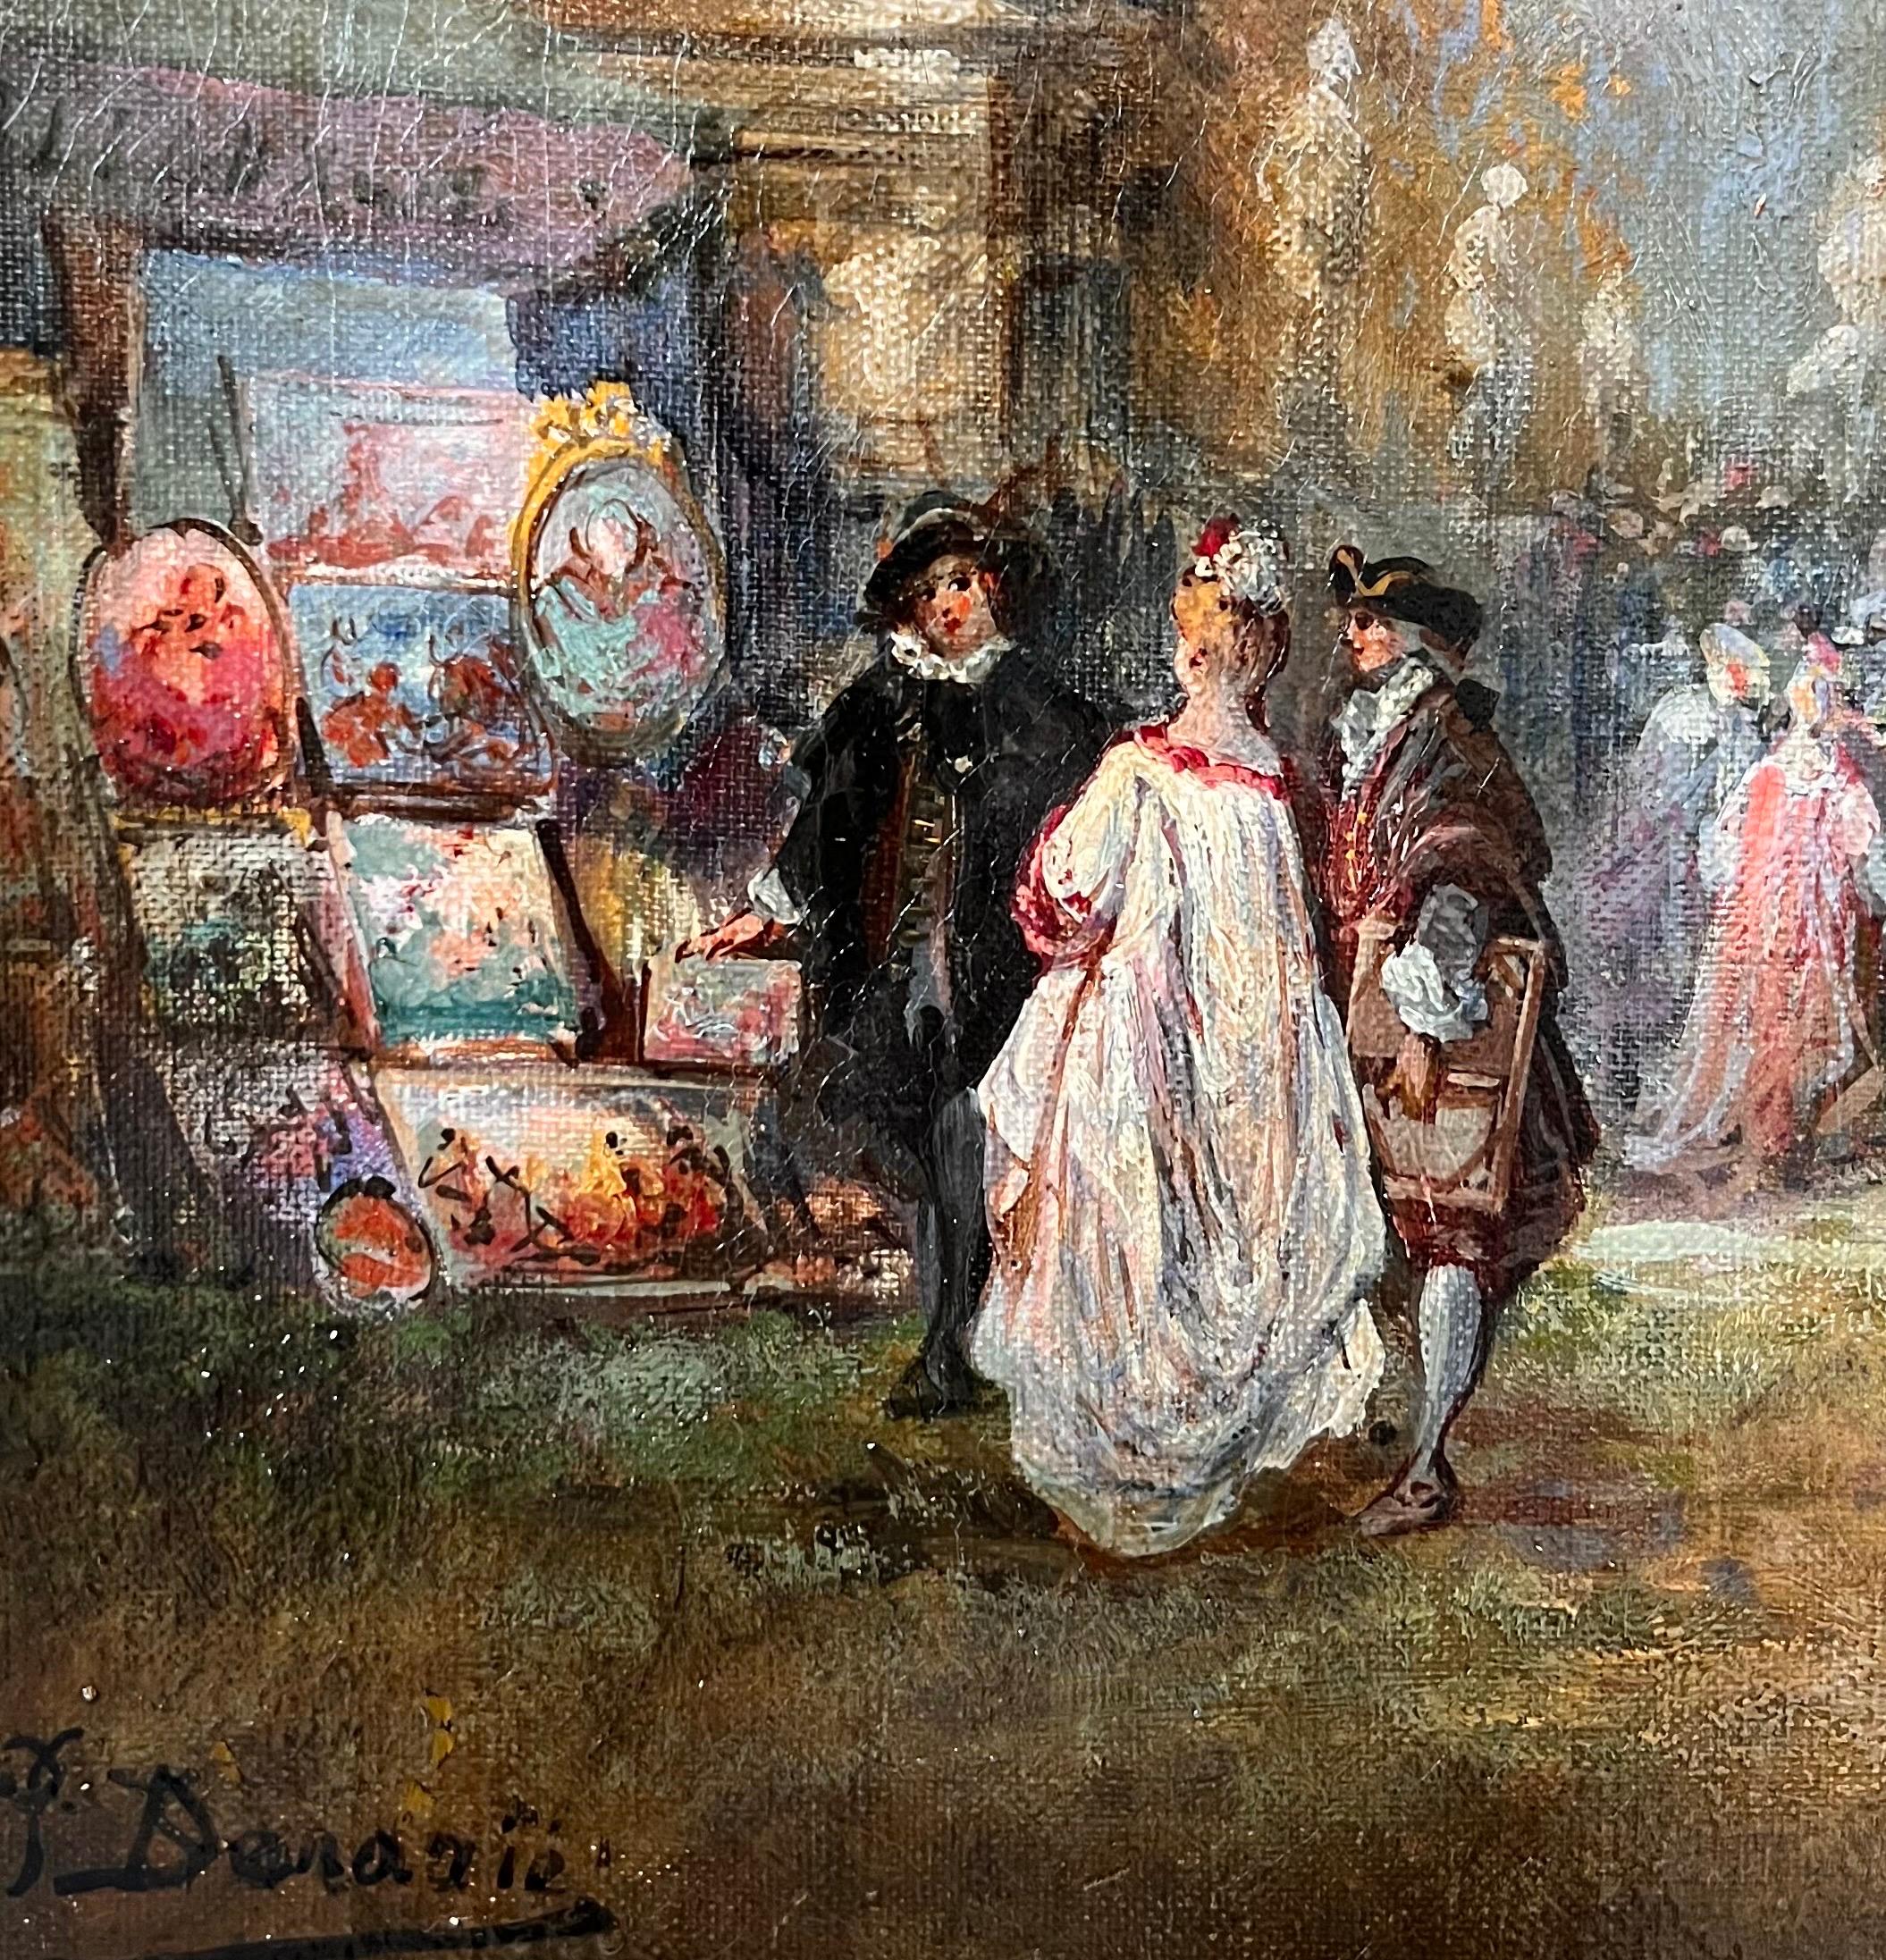 19th century French romantic painting depicting a peaceful and luxurious day at an outdoor art market

Elegantly dressed people can be seen browsing through an open air art market on a sunny day, glancing at the many beautiful works on display. Some